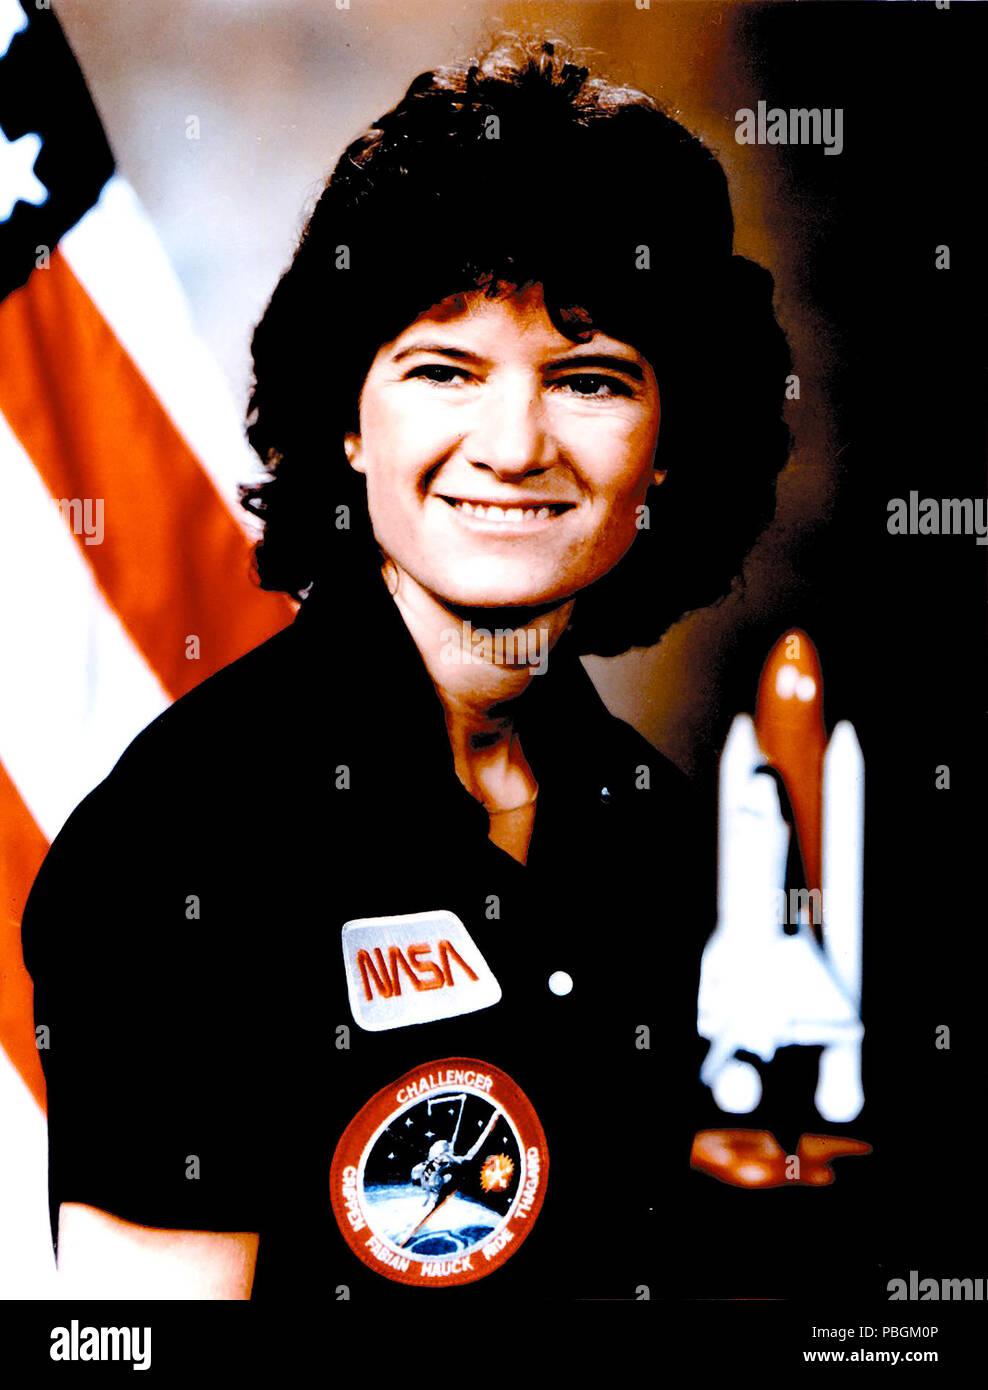 Sally Ride was the first American woman in space. NASA selected Dr. Ride as an astronaut candidate in January 1978. She completed her training in August 1979, and began her astronaut career as a mission specialist on STS-7, which launched from Kennedy Space Center, Florida on June 18, 1983. Stock Photo